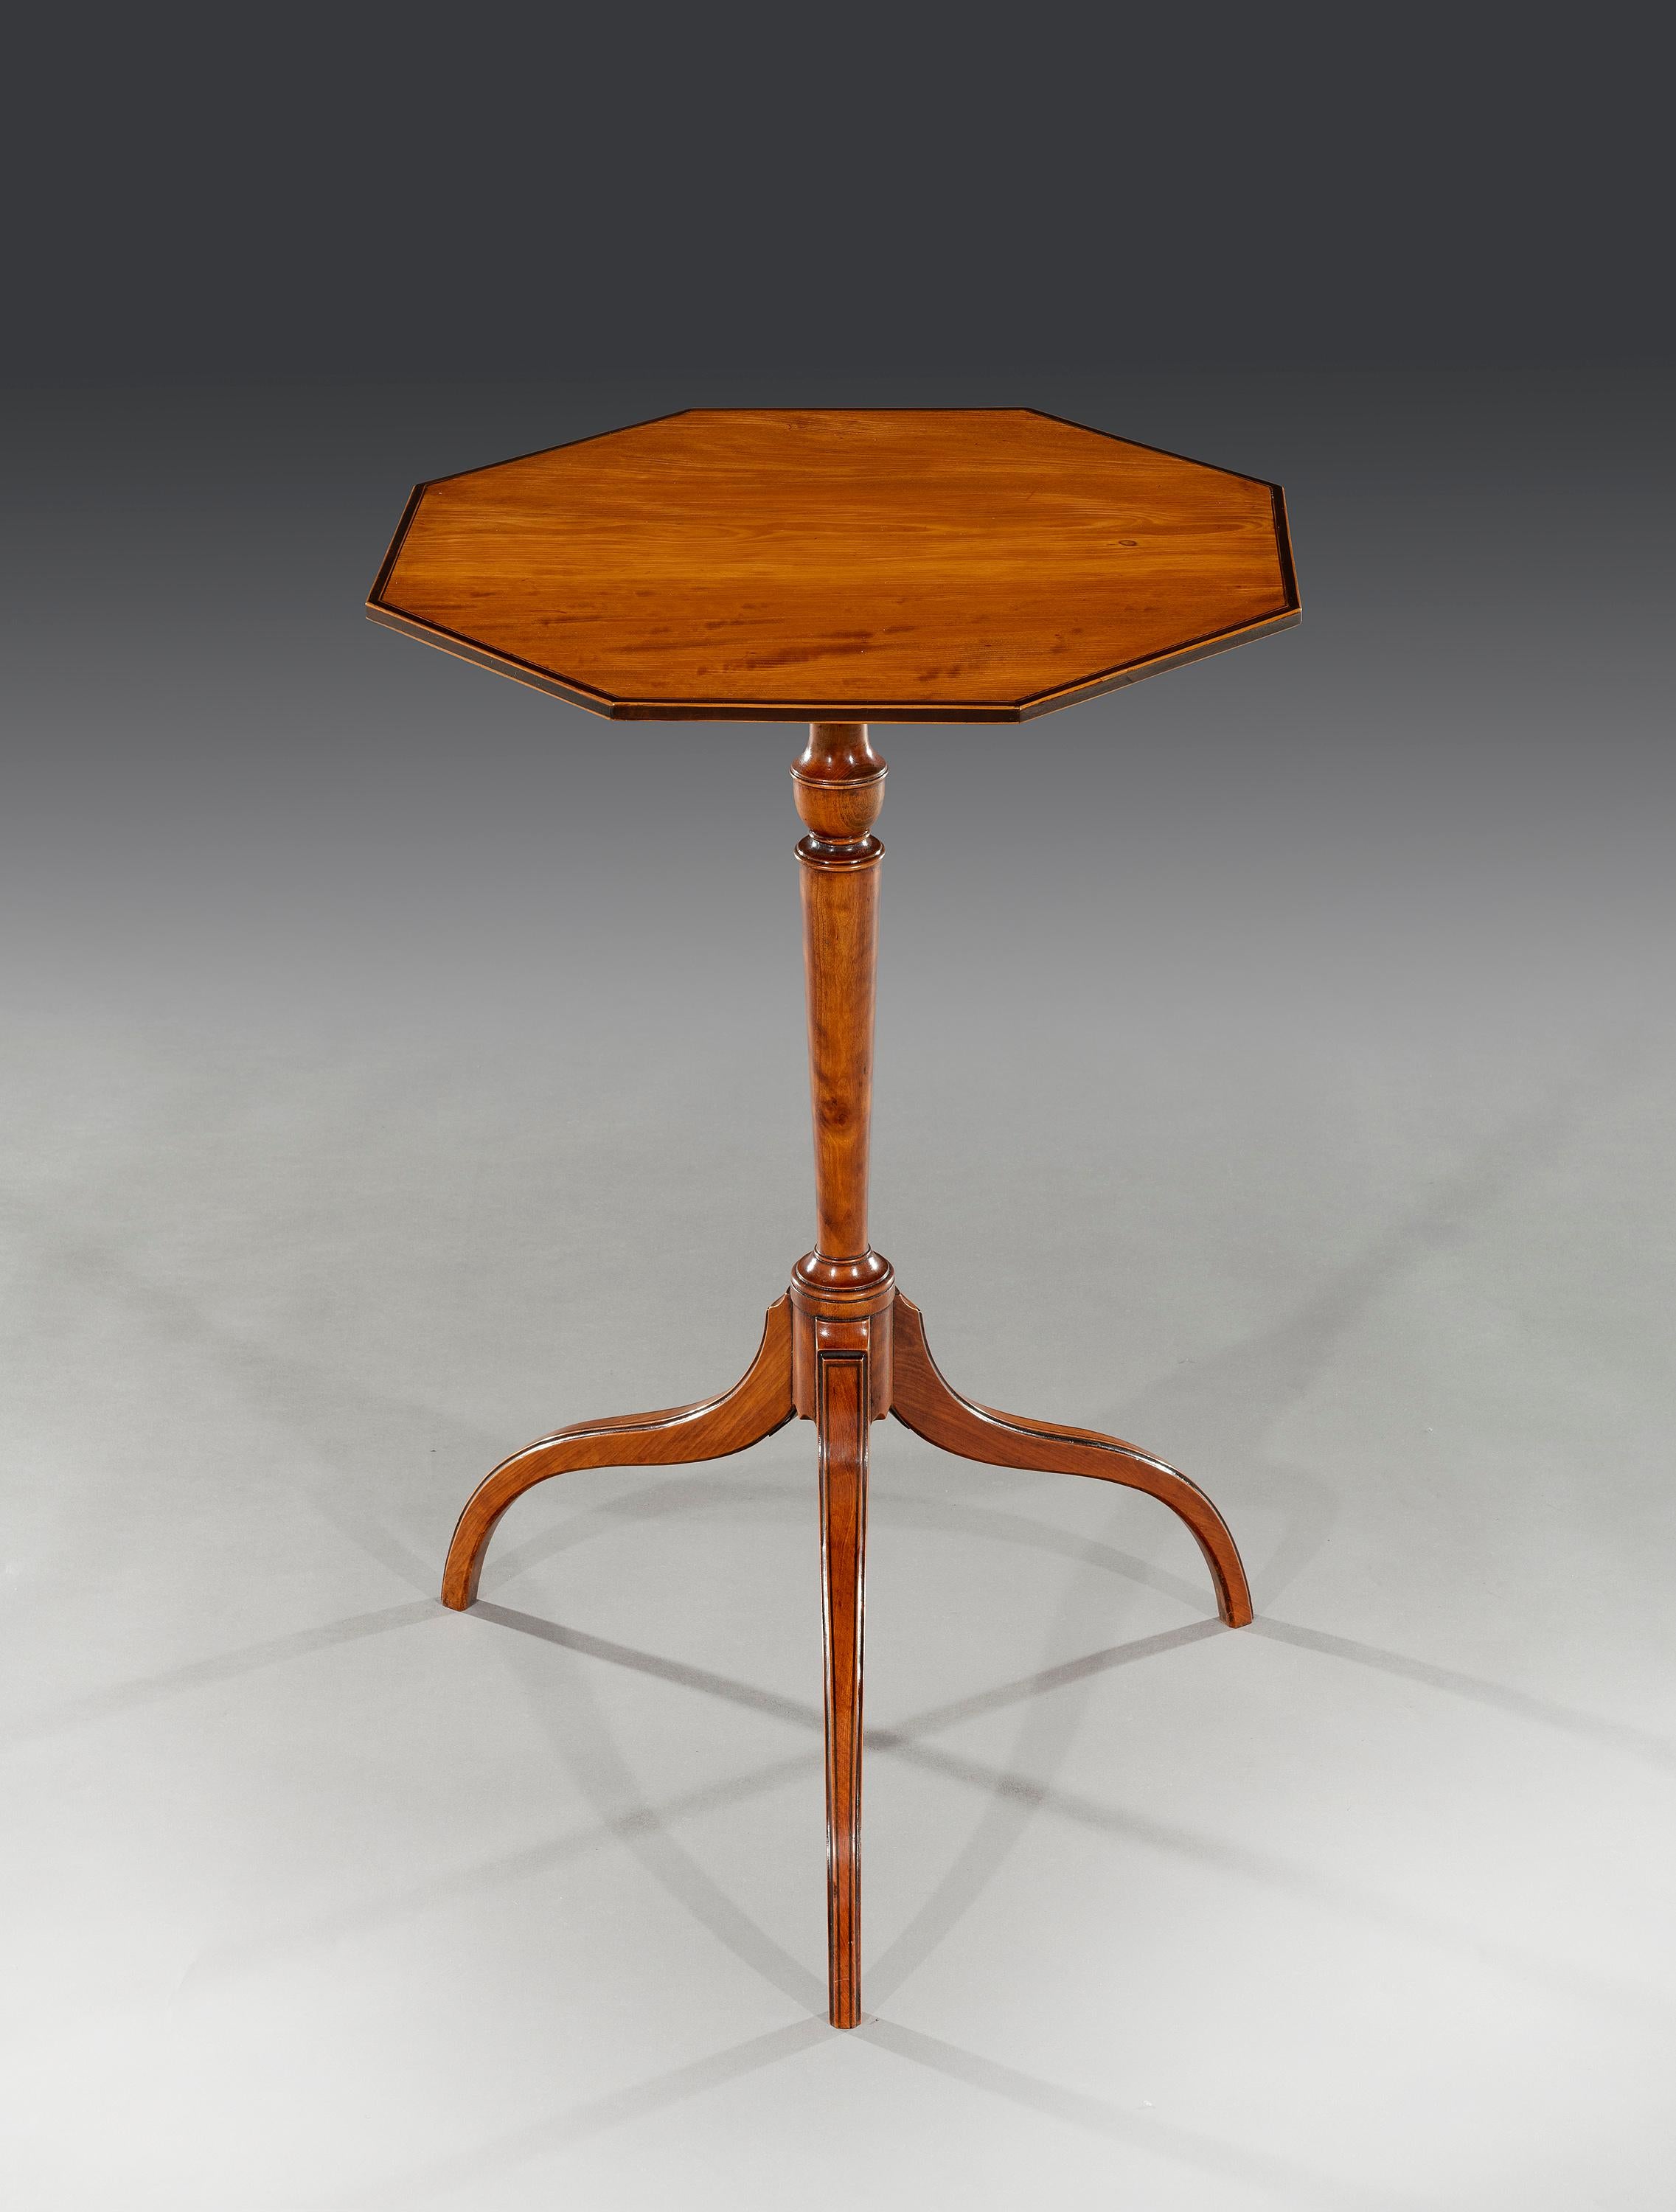 George III Period 18th Century Satinwood Octagonal Tilt-Top Occasional Table In Good Condition For Sale In Bradford on Avon, GB